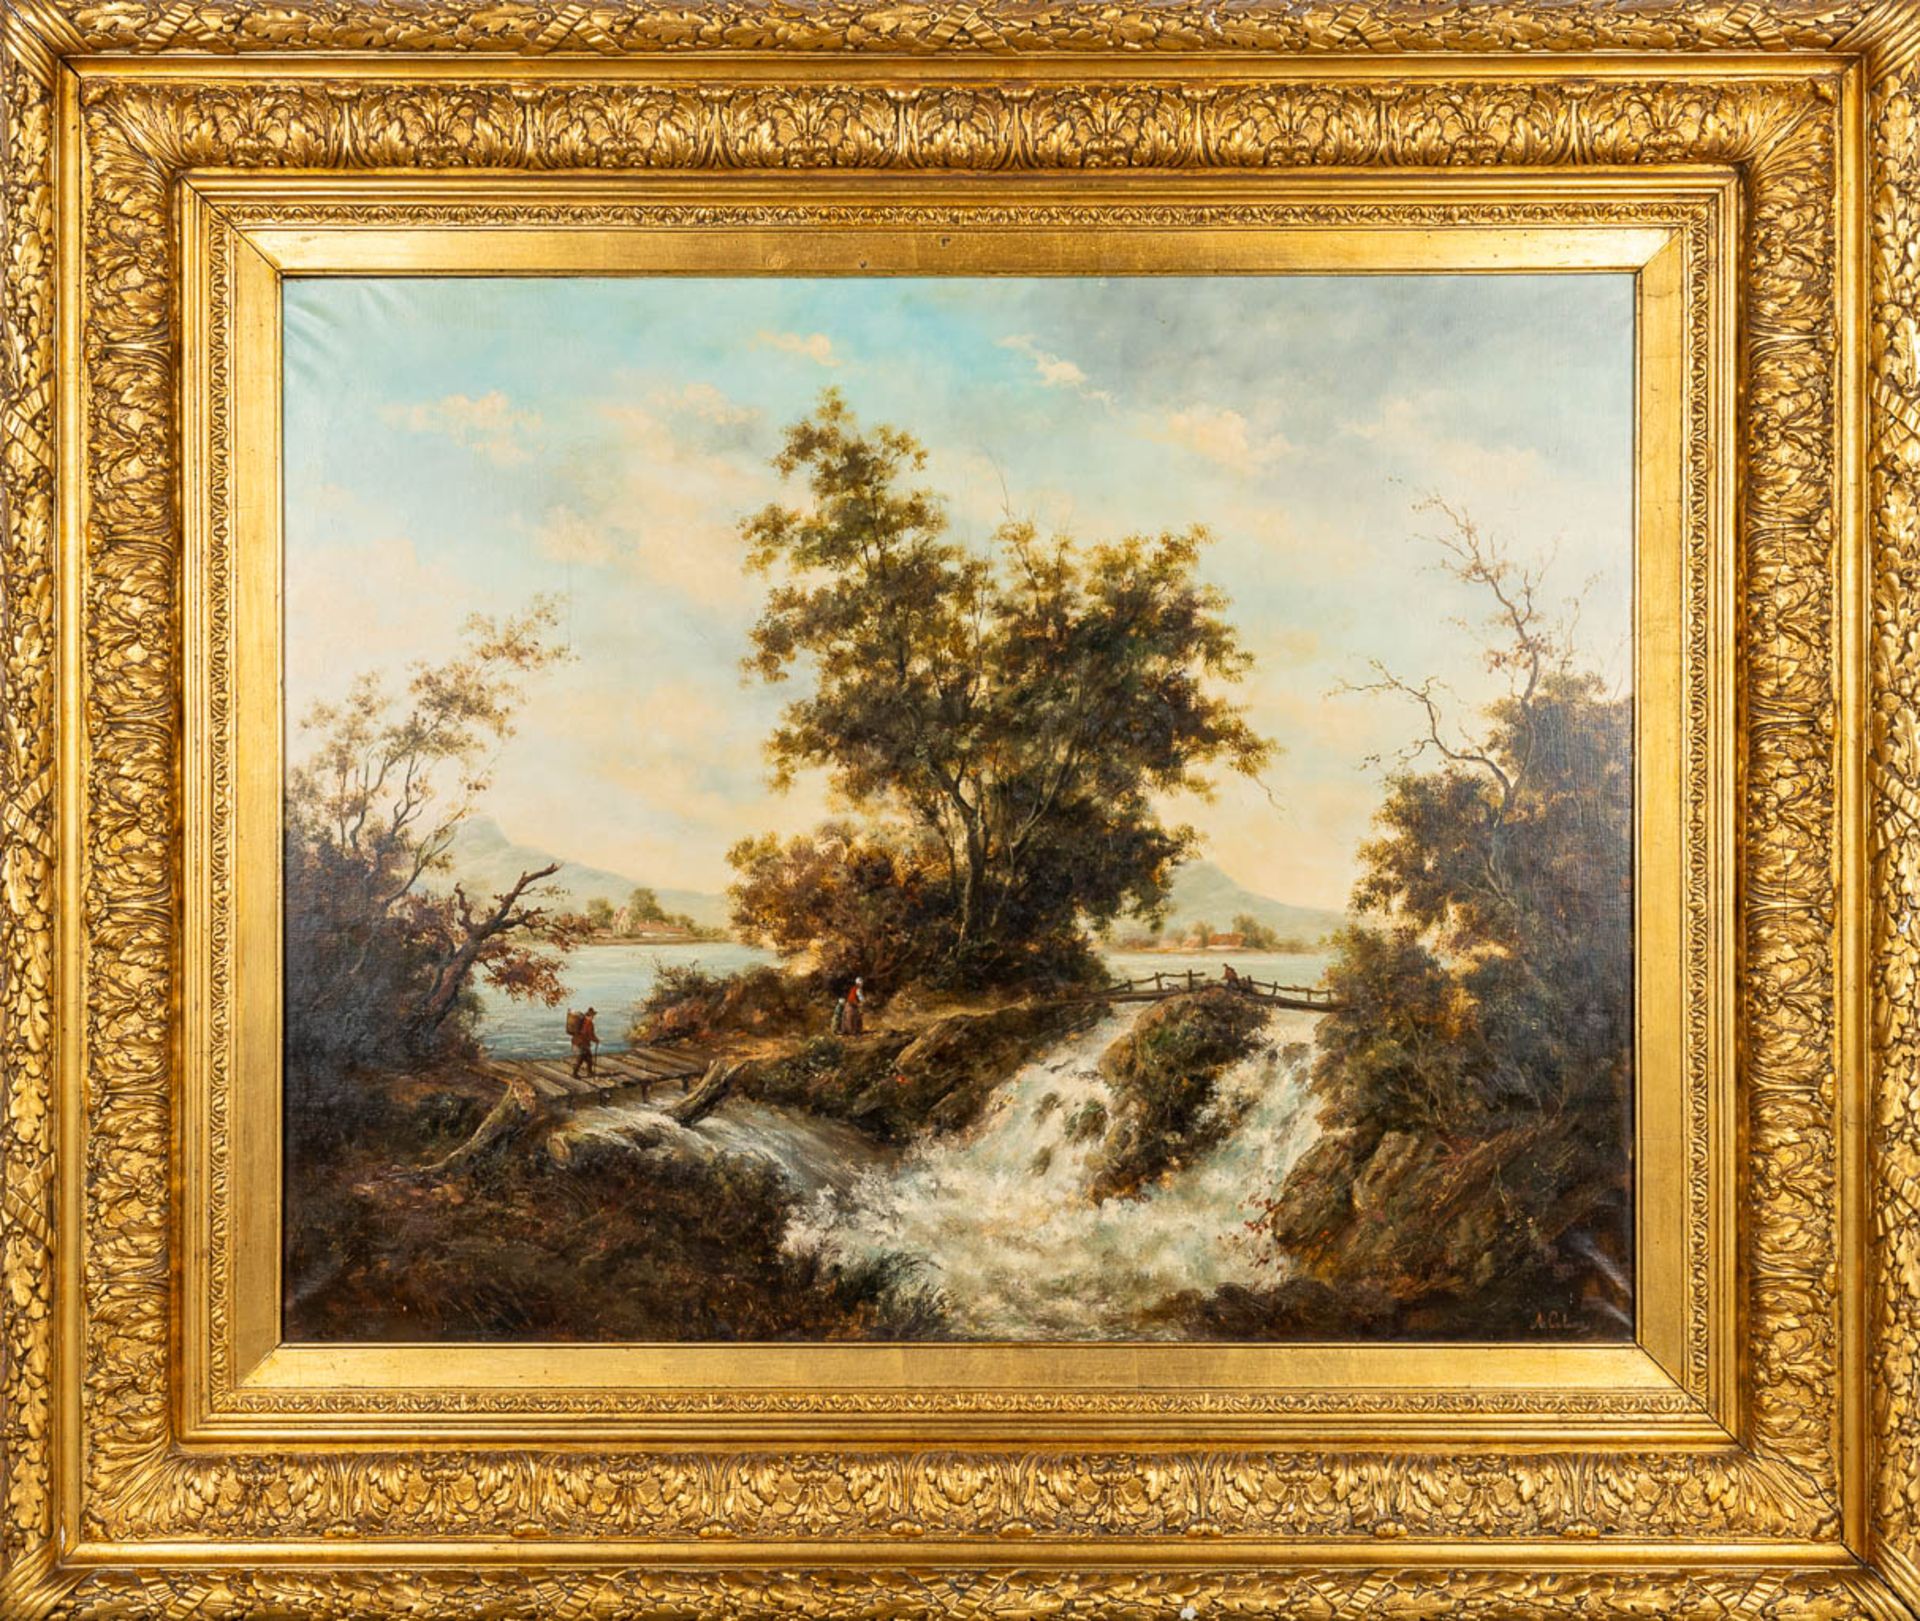 Arthur CALAME (1843-1919) 'The Waterfall', a painting oil on canvas. (W:130 x H:102 cm) - Image 13 of 14